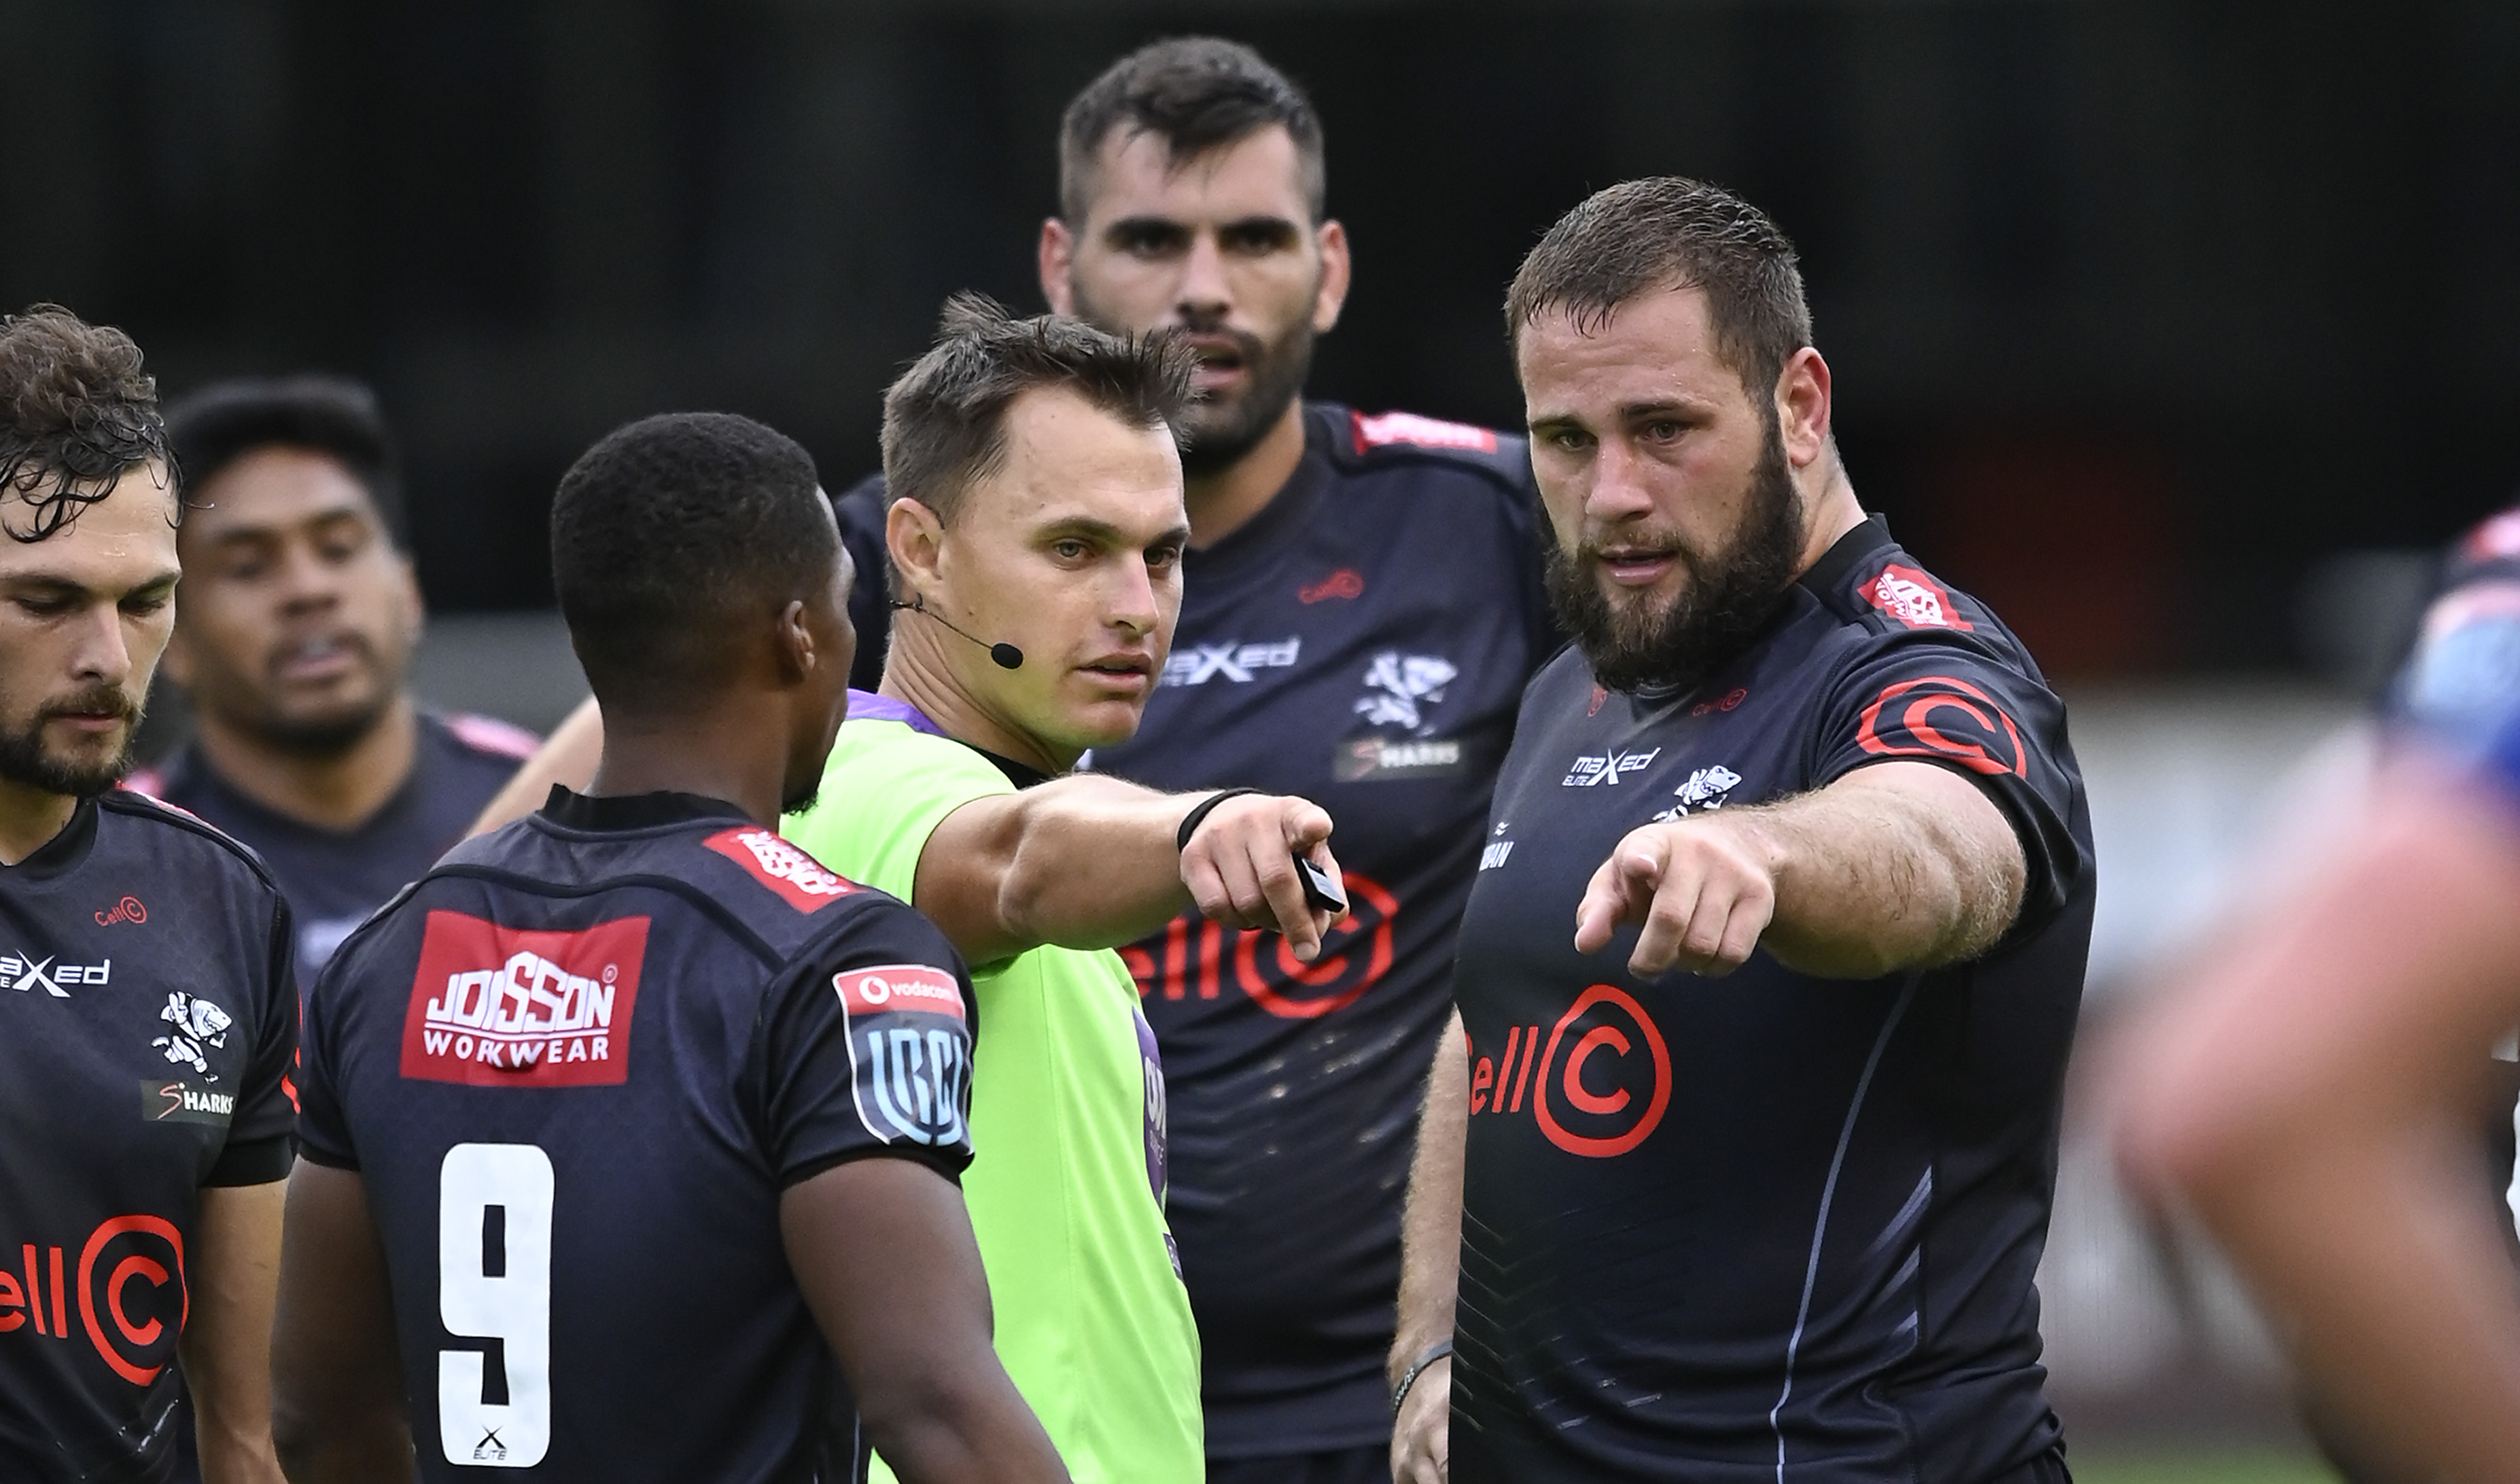 Marius van der Westhuizen (Referee) and Thomas du Toit, (V/C) of the Sharks discusses points of concern during the United Rugby Championship 2021/22 match between the Sharks and Stormers held at Kings Park in Durban on 29 January 2021 ©Gerhard Duraan/BackpagePix